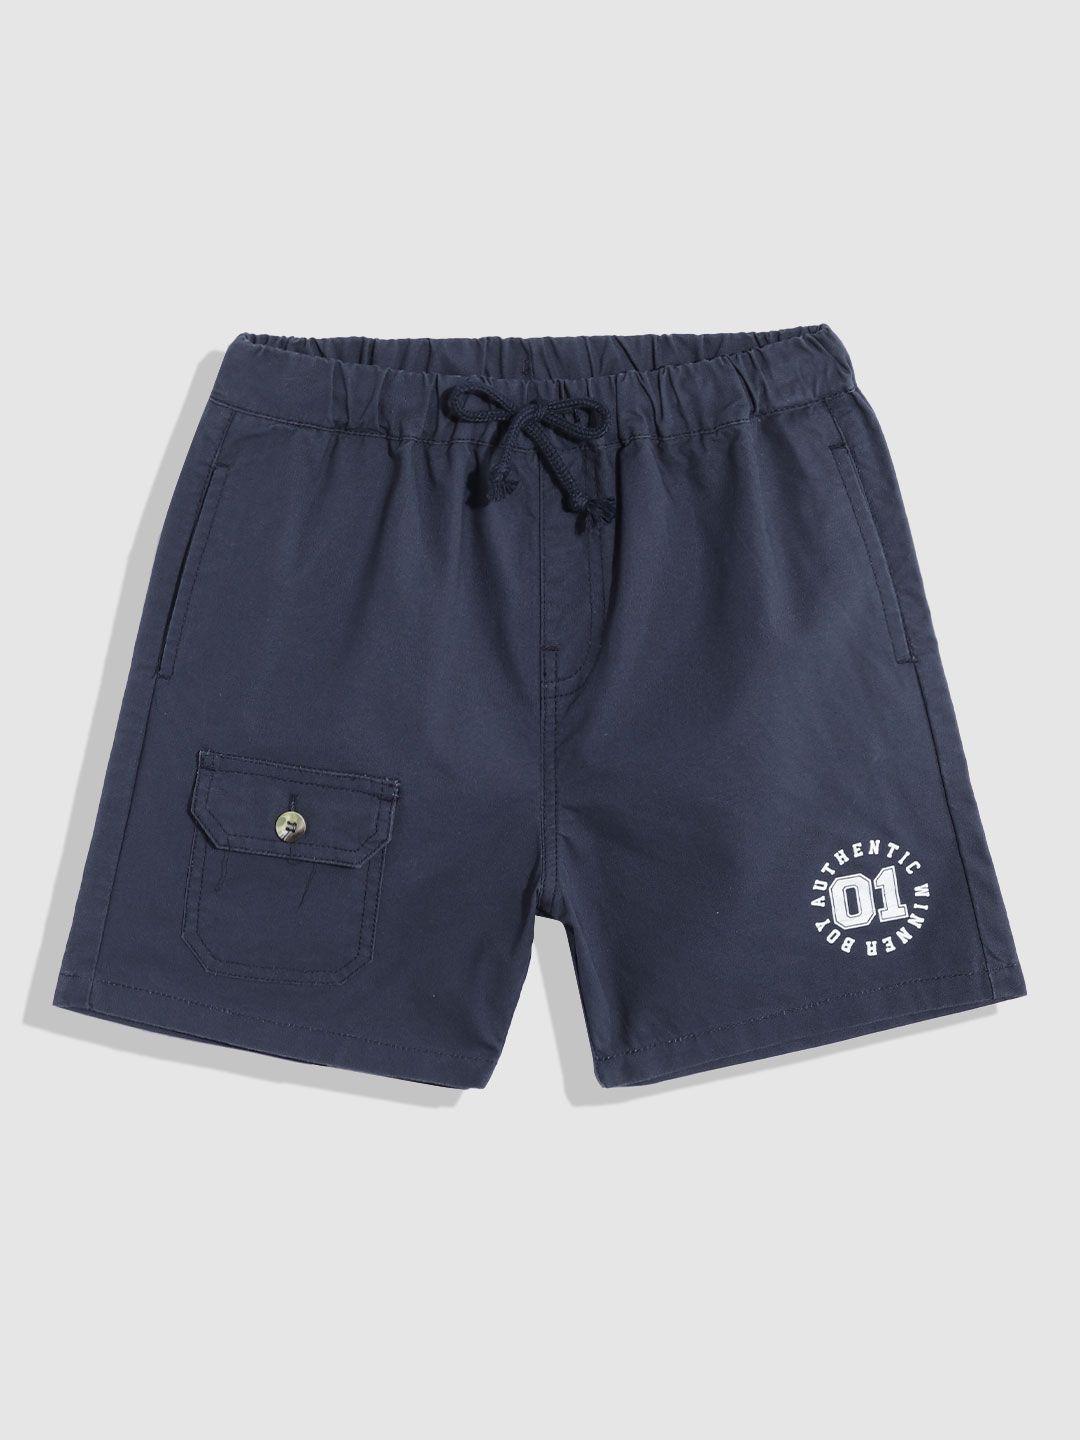 yk boys typography printed slim fit pure cotton shorts